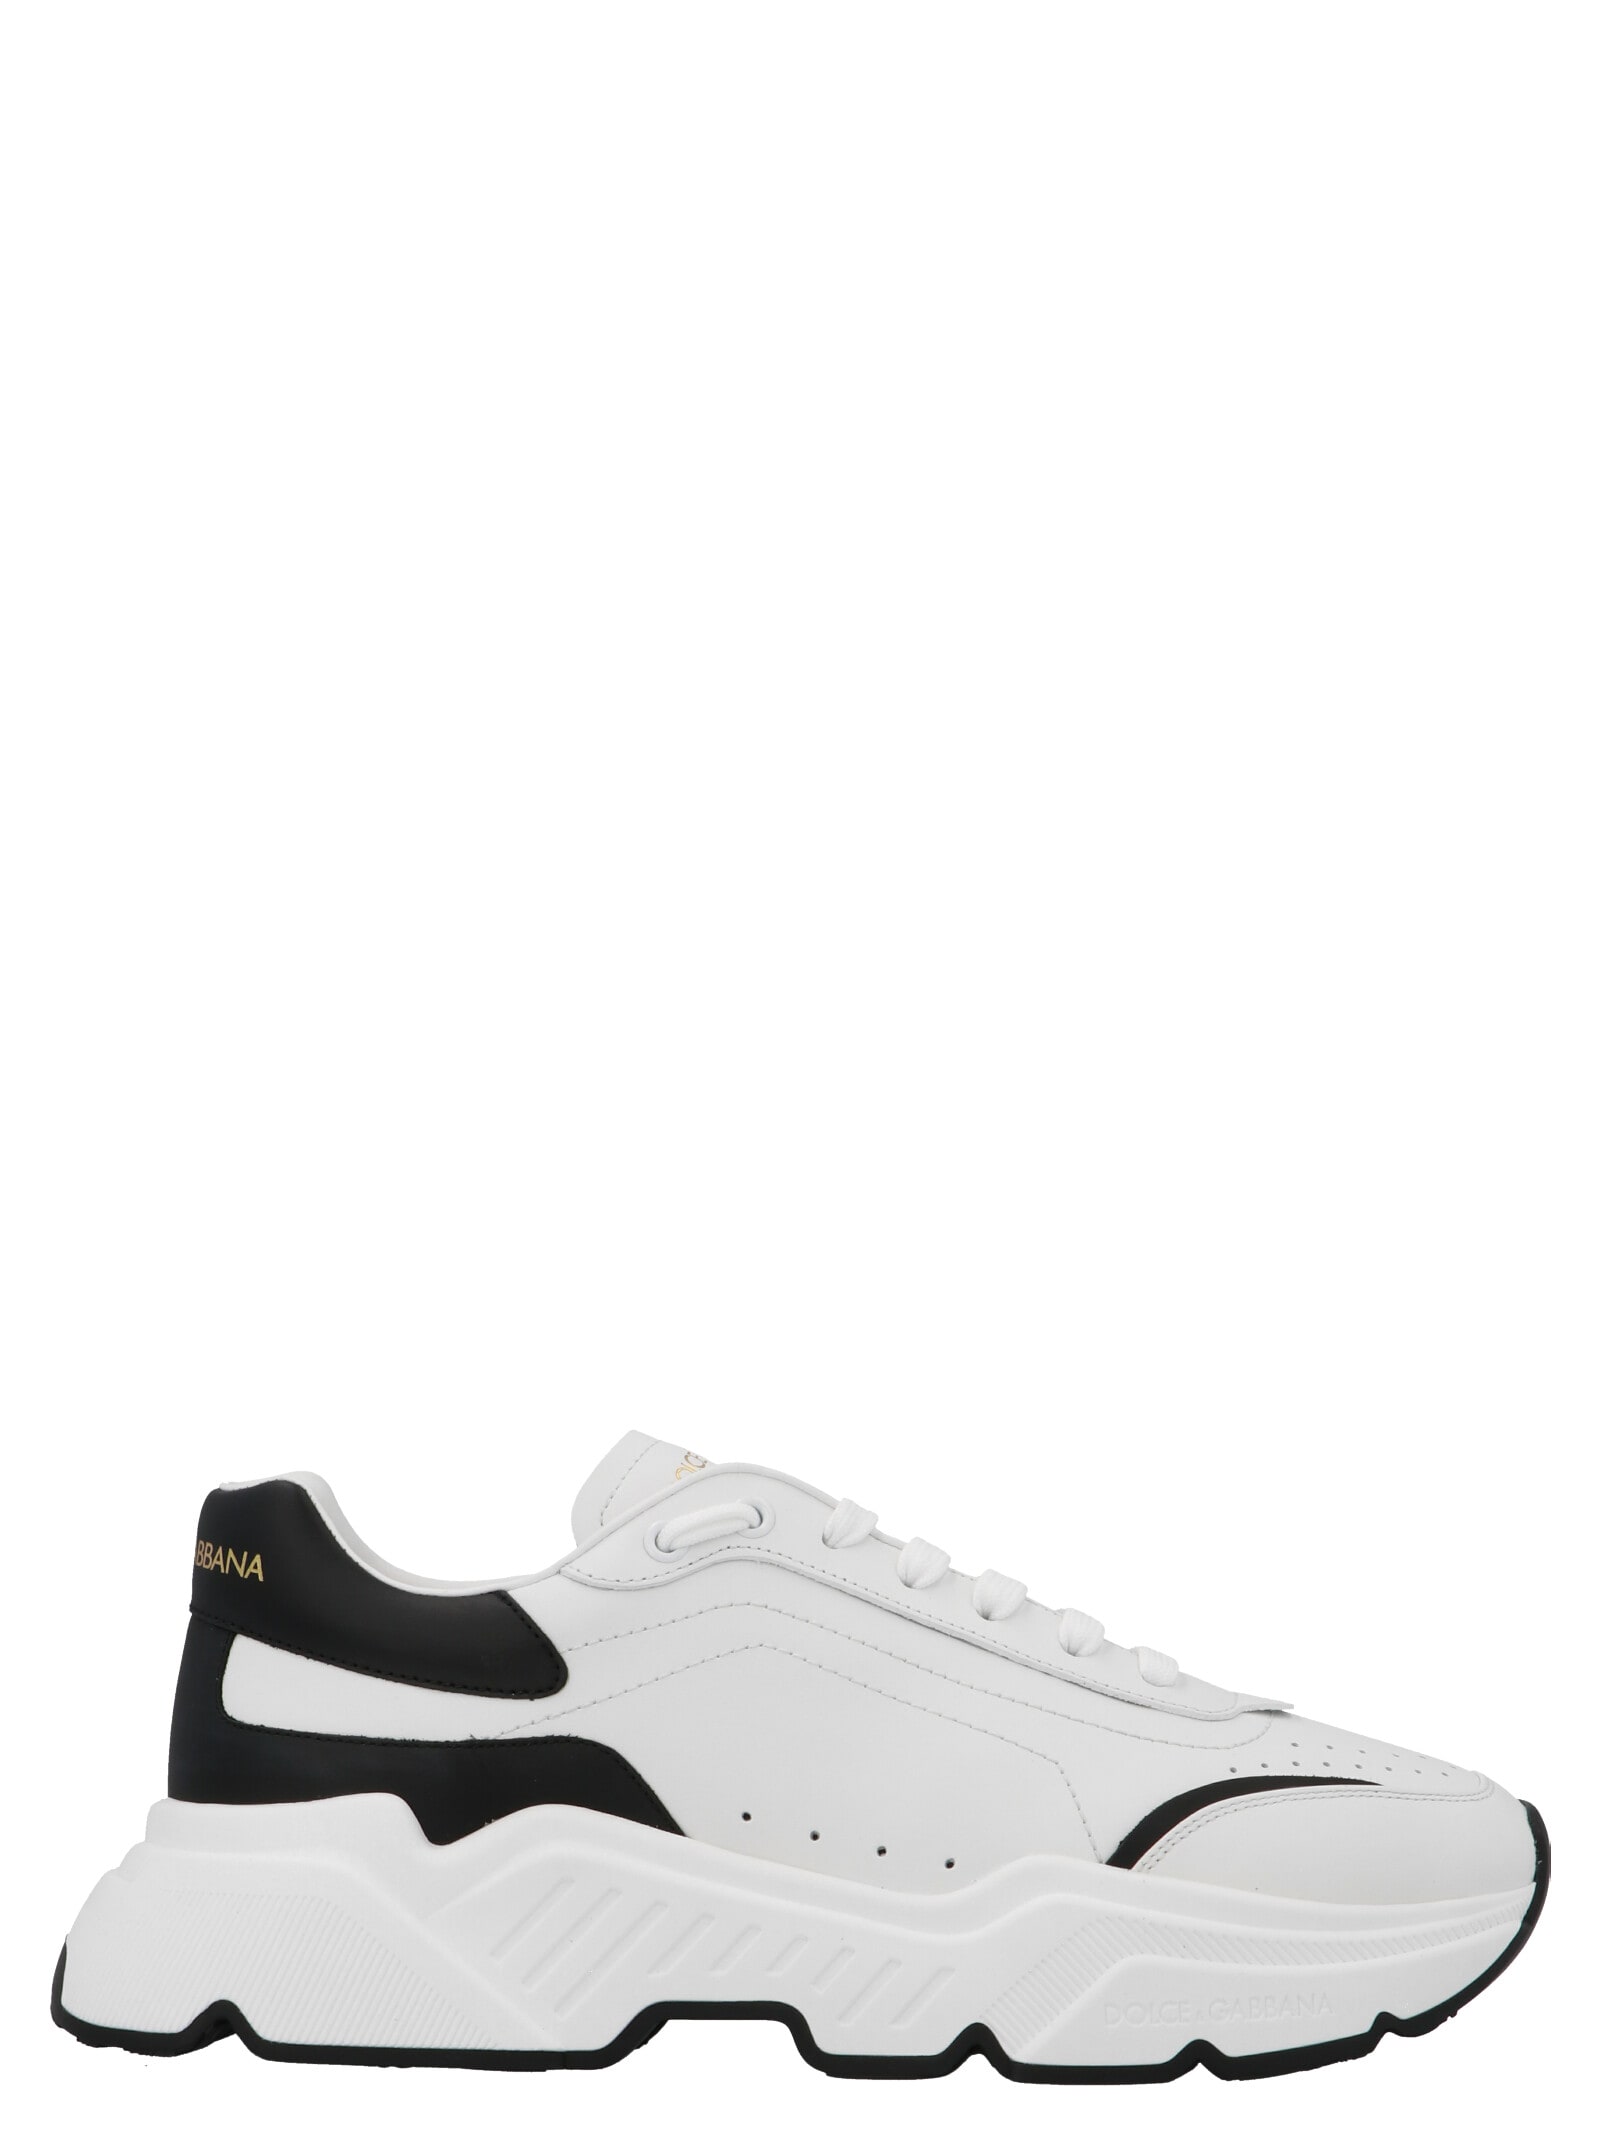 DOLCE & GABBANA DAY MASTER SNEAKERS